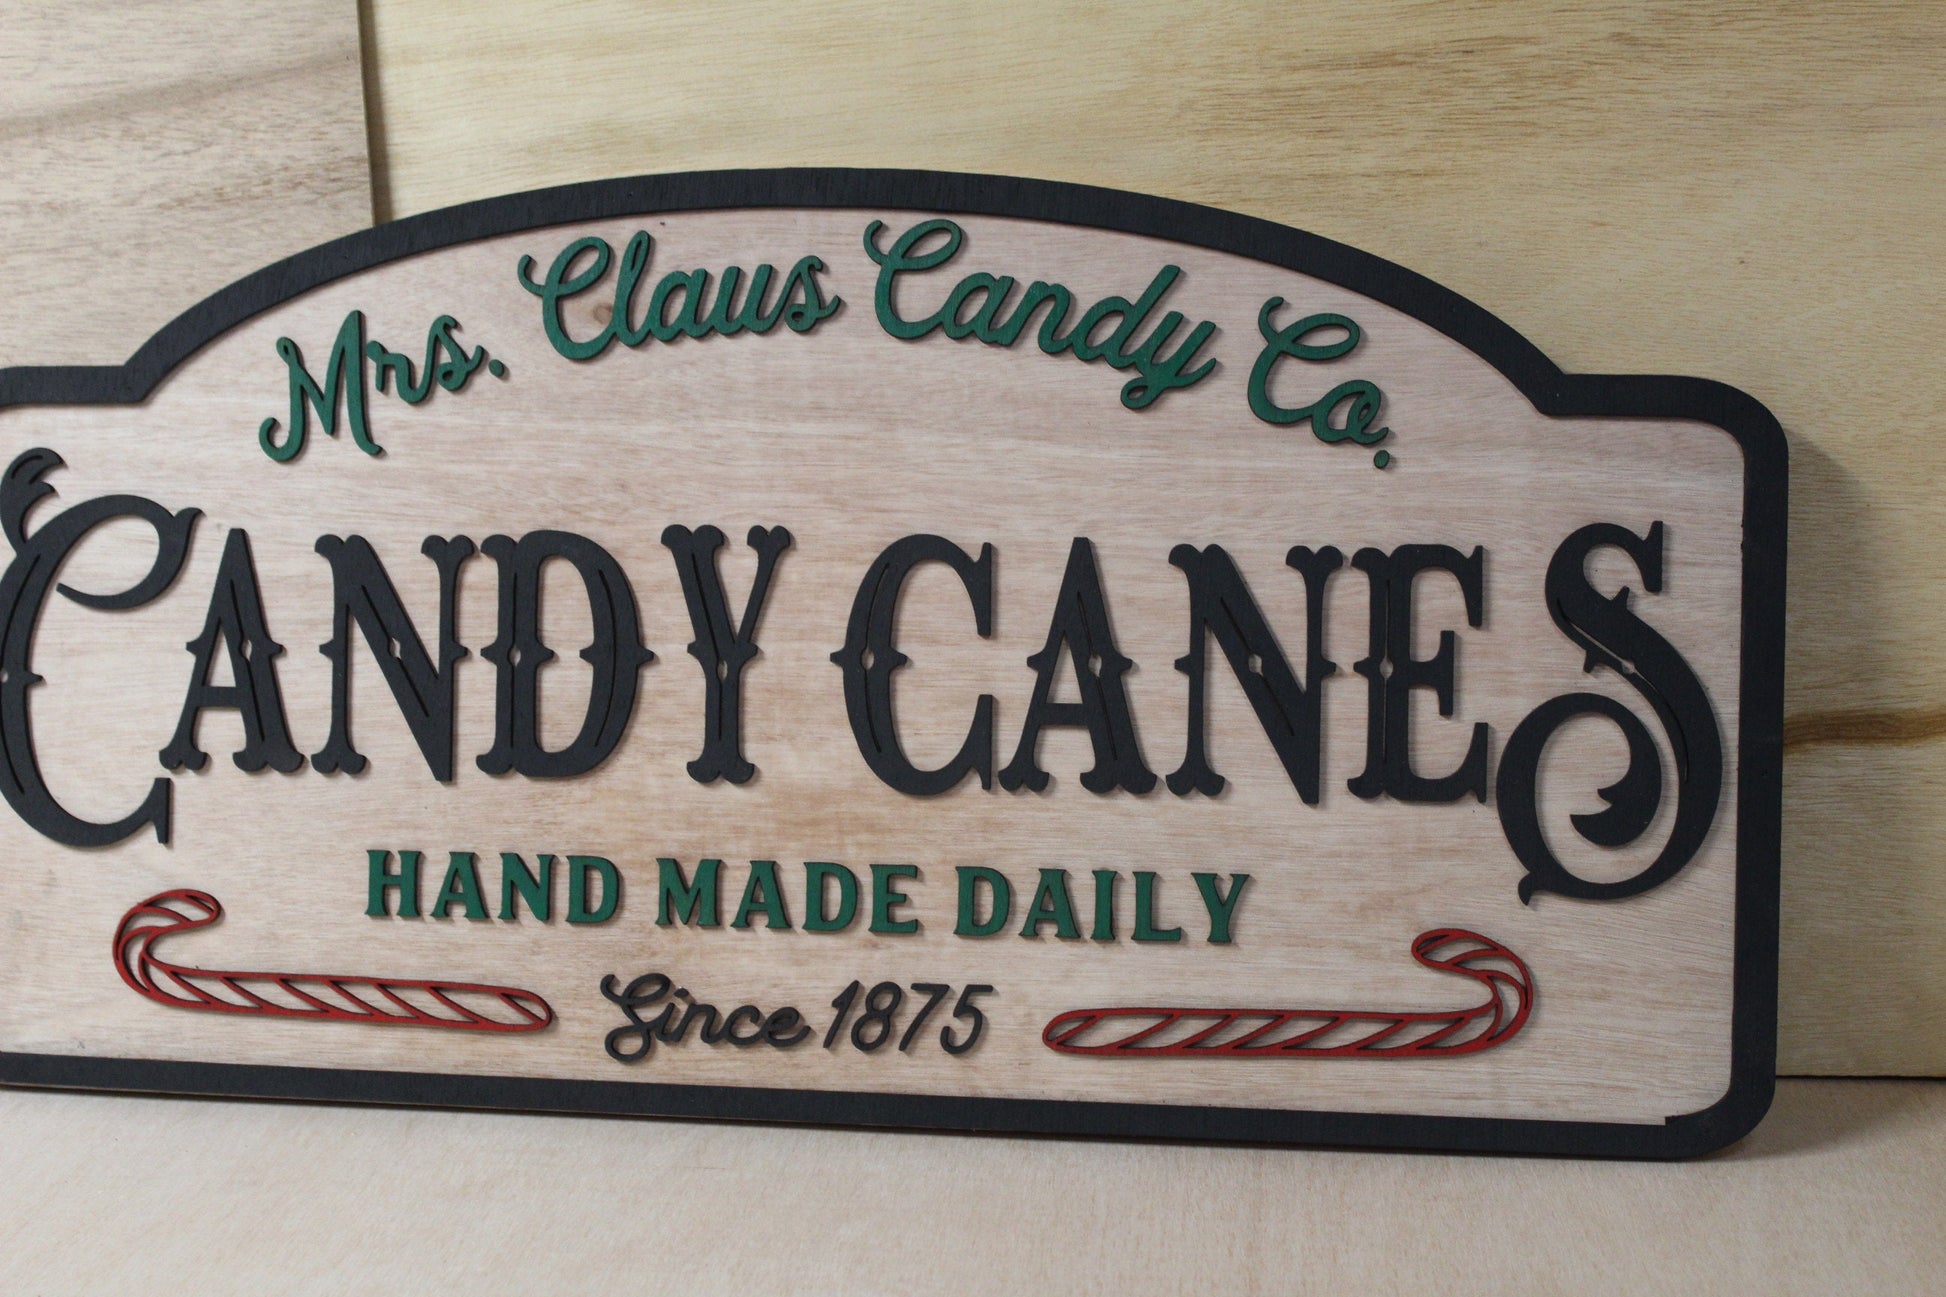 Candy Canes Mrs Claus Candy Co. Handmade Fresh Holiday Decor Christmas Shop Business 3D Raised off Red and Green Festive Candy Maker